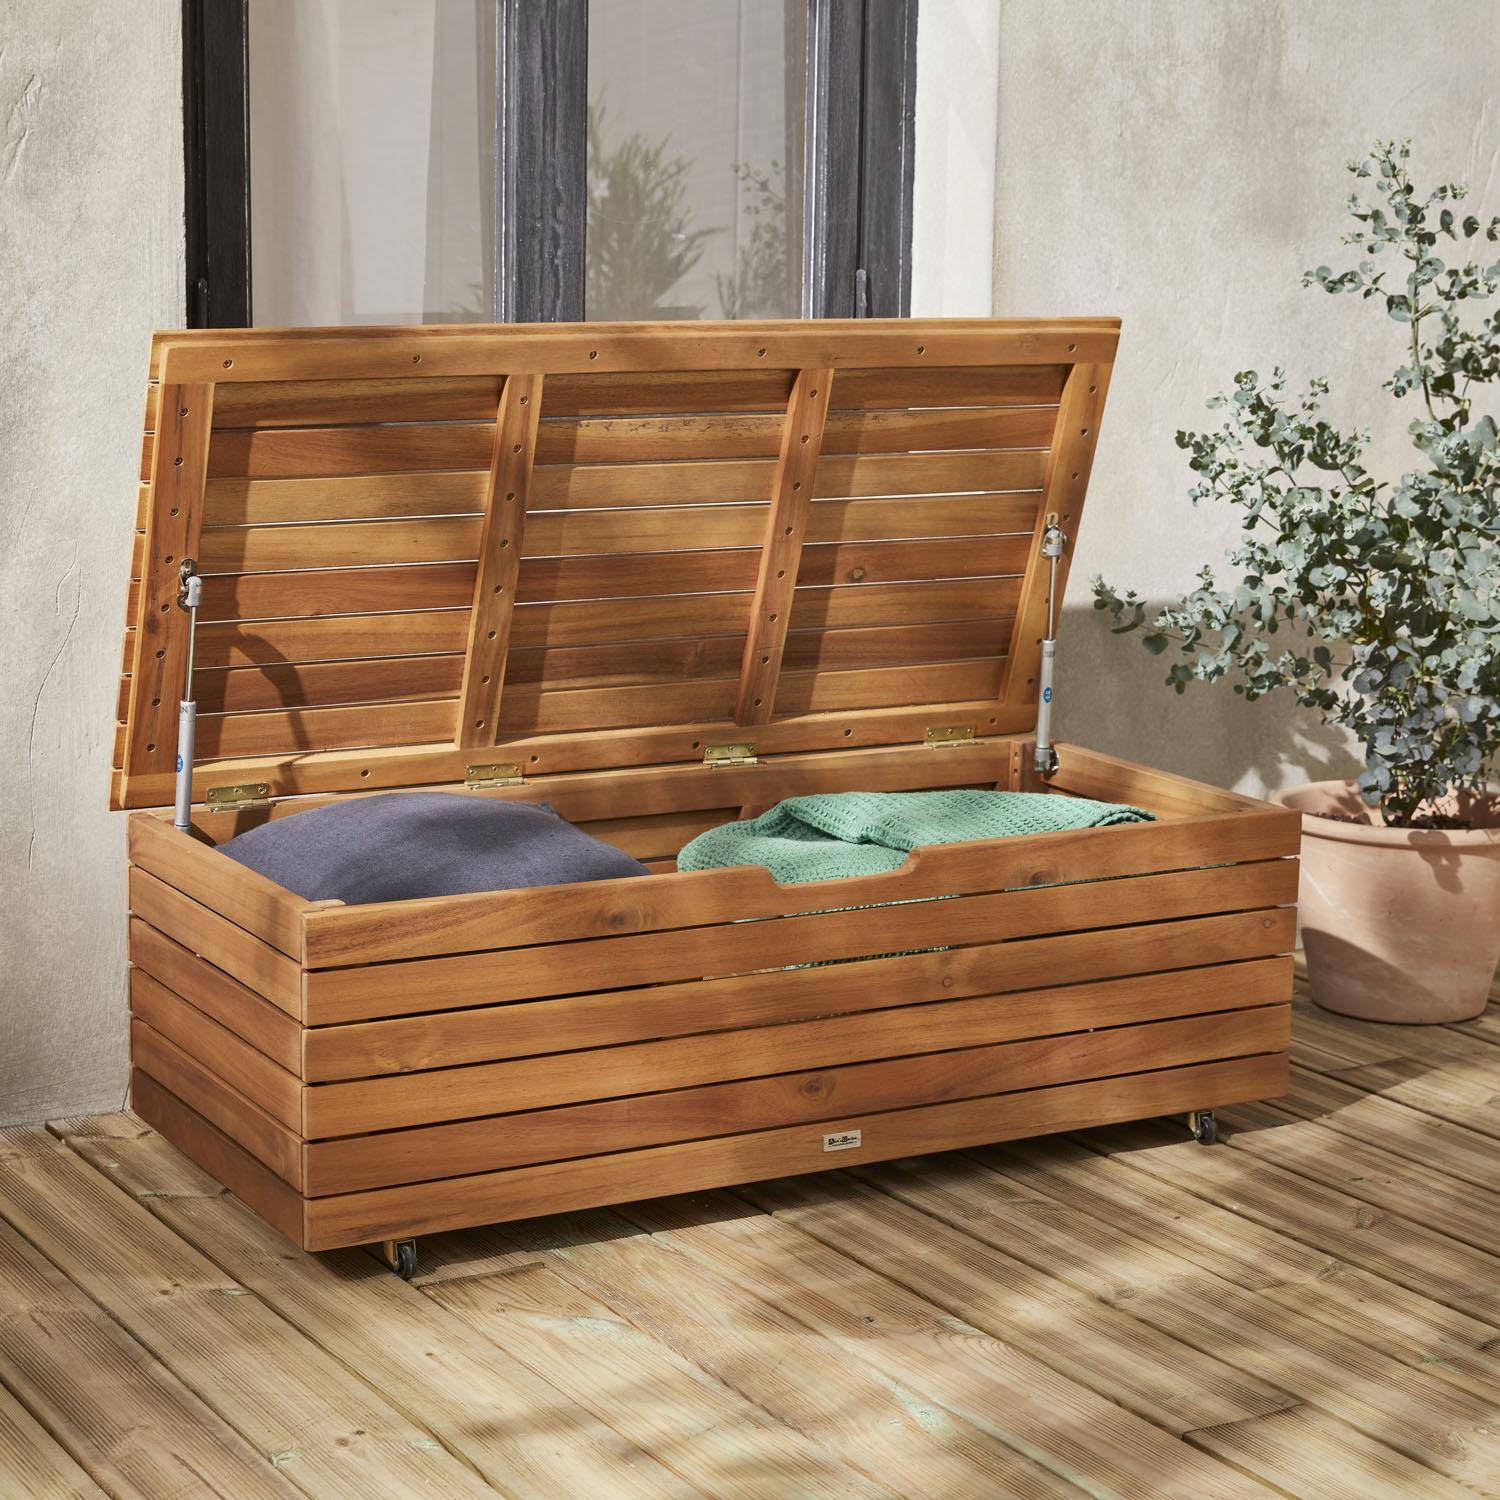 Garden storage box in wood - Saragosse - 110L, cushion storage, 107x48.5cm with hydraulic lift opening and casters,sweeek,Photo2